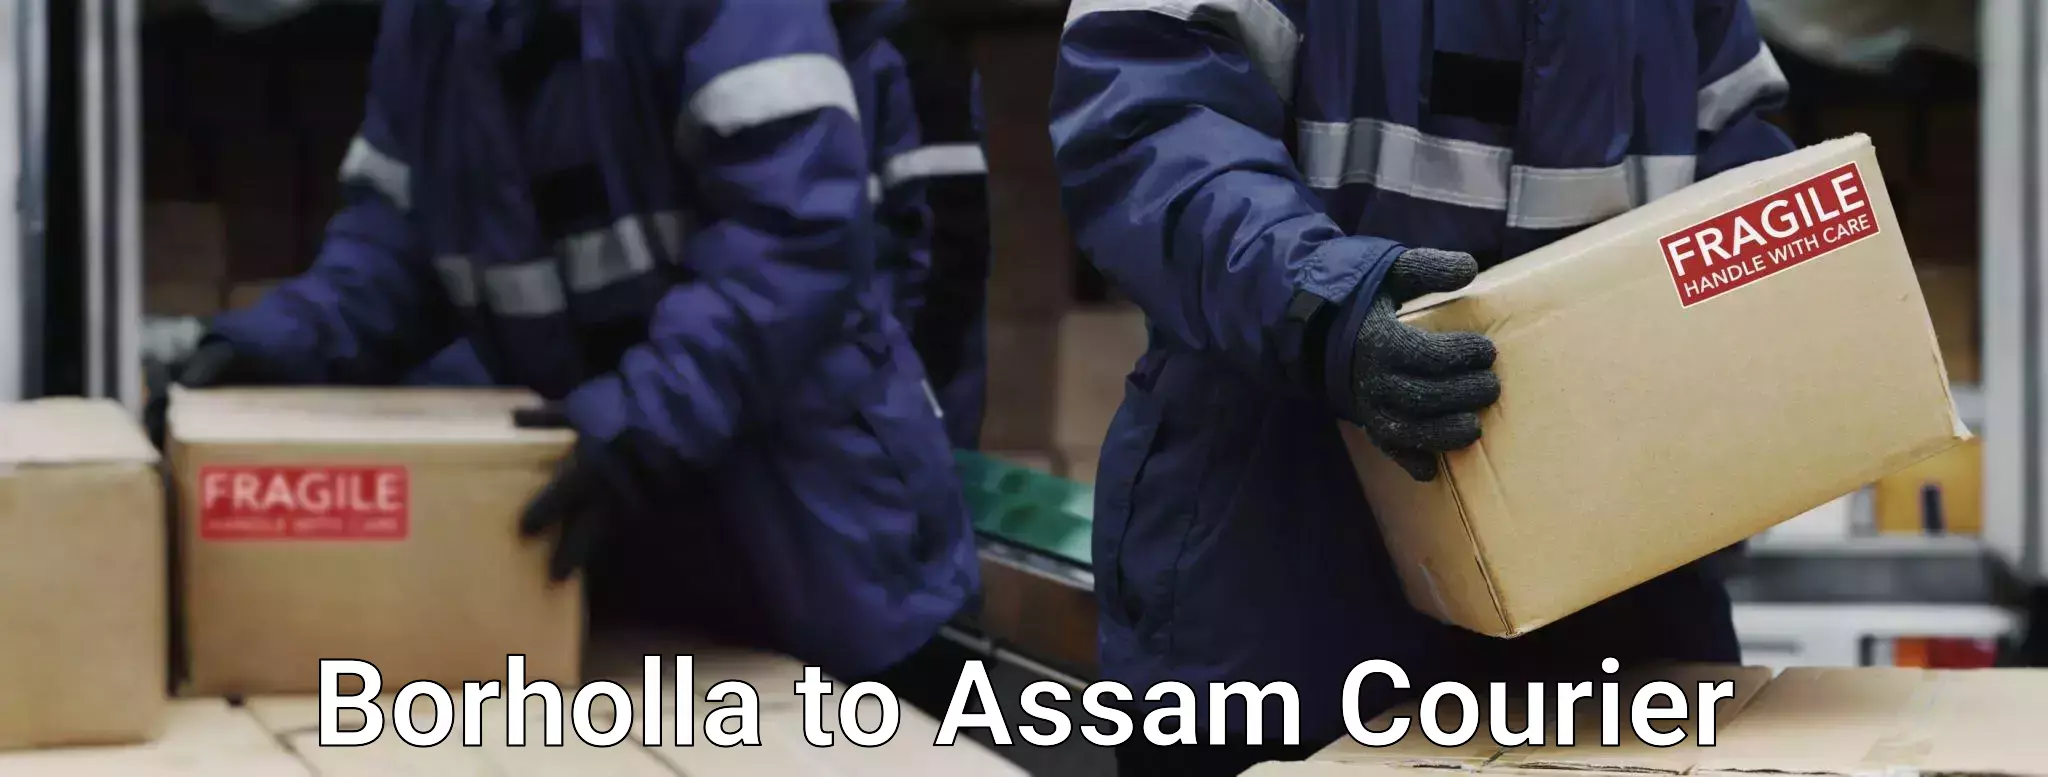 Luggage delivery system Borholla to Assam